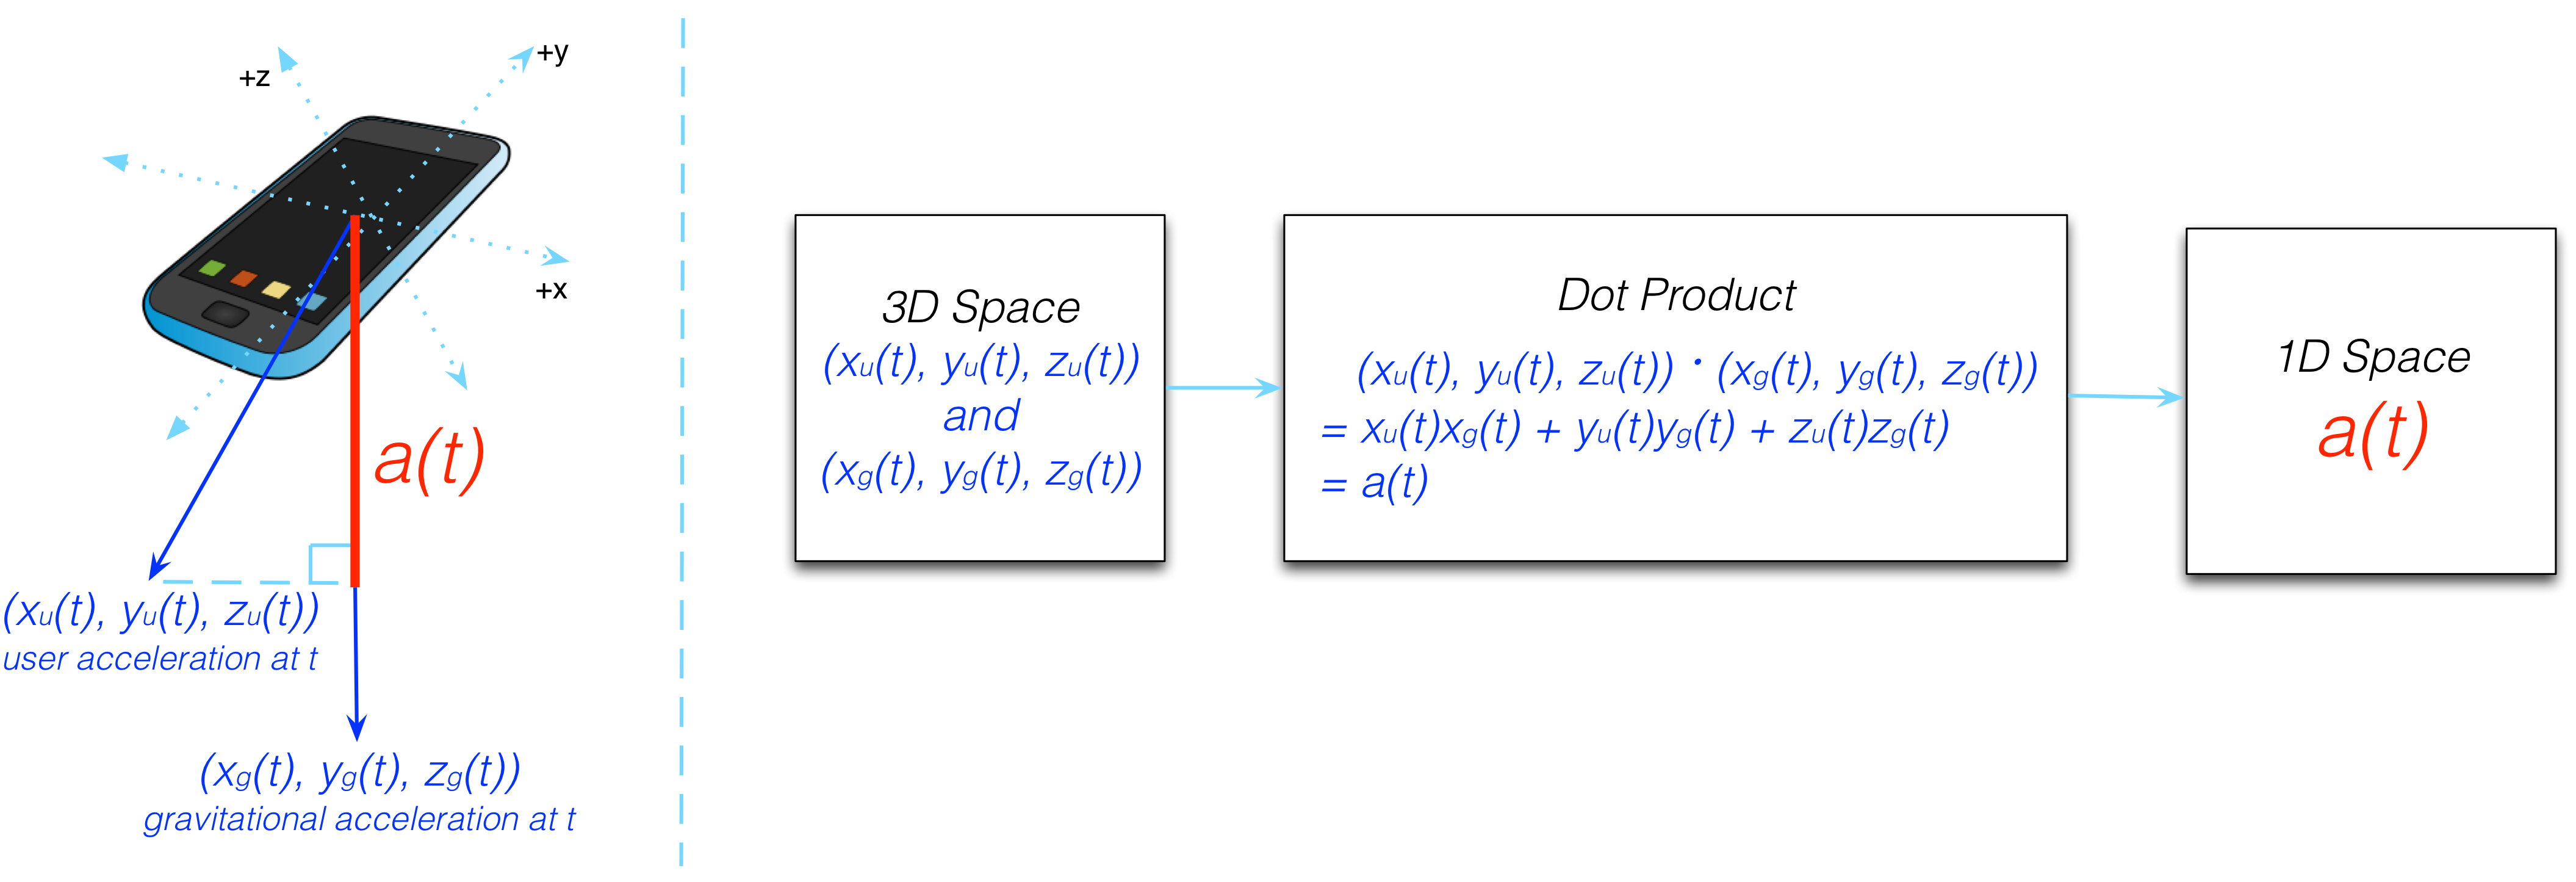 Figure 16.10 - The dot product